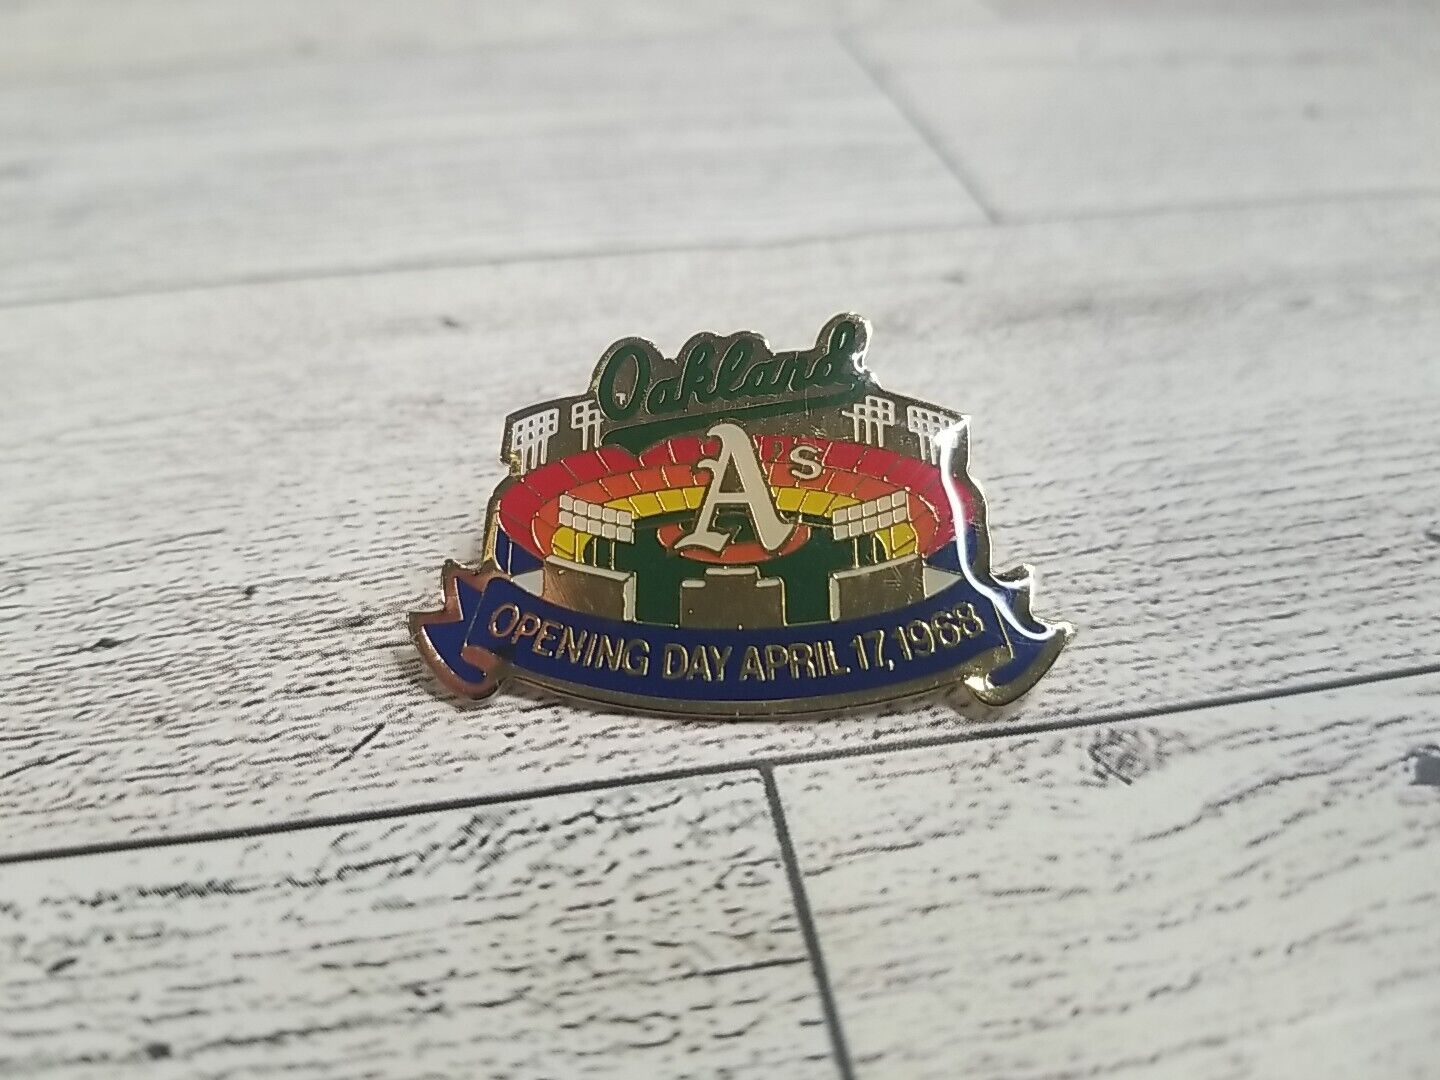 Oakland A's Athletics Unocal 76 April 17, 1968 Opening Day Lapel Hat Pin